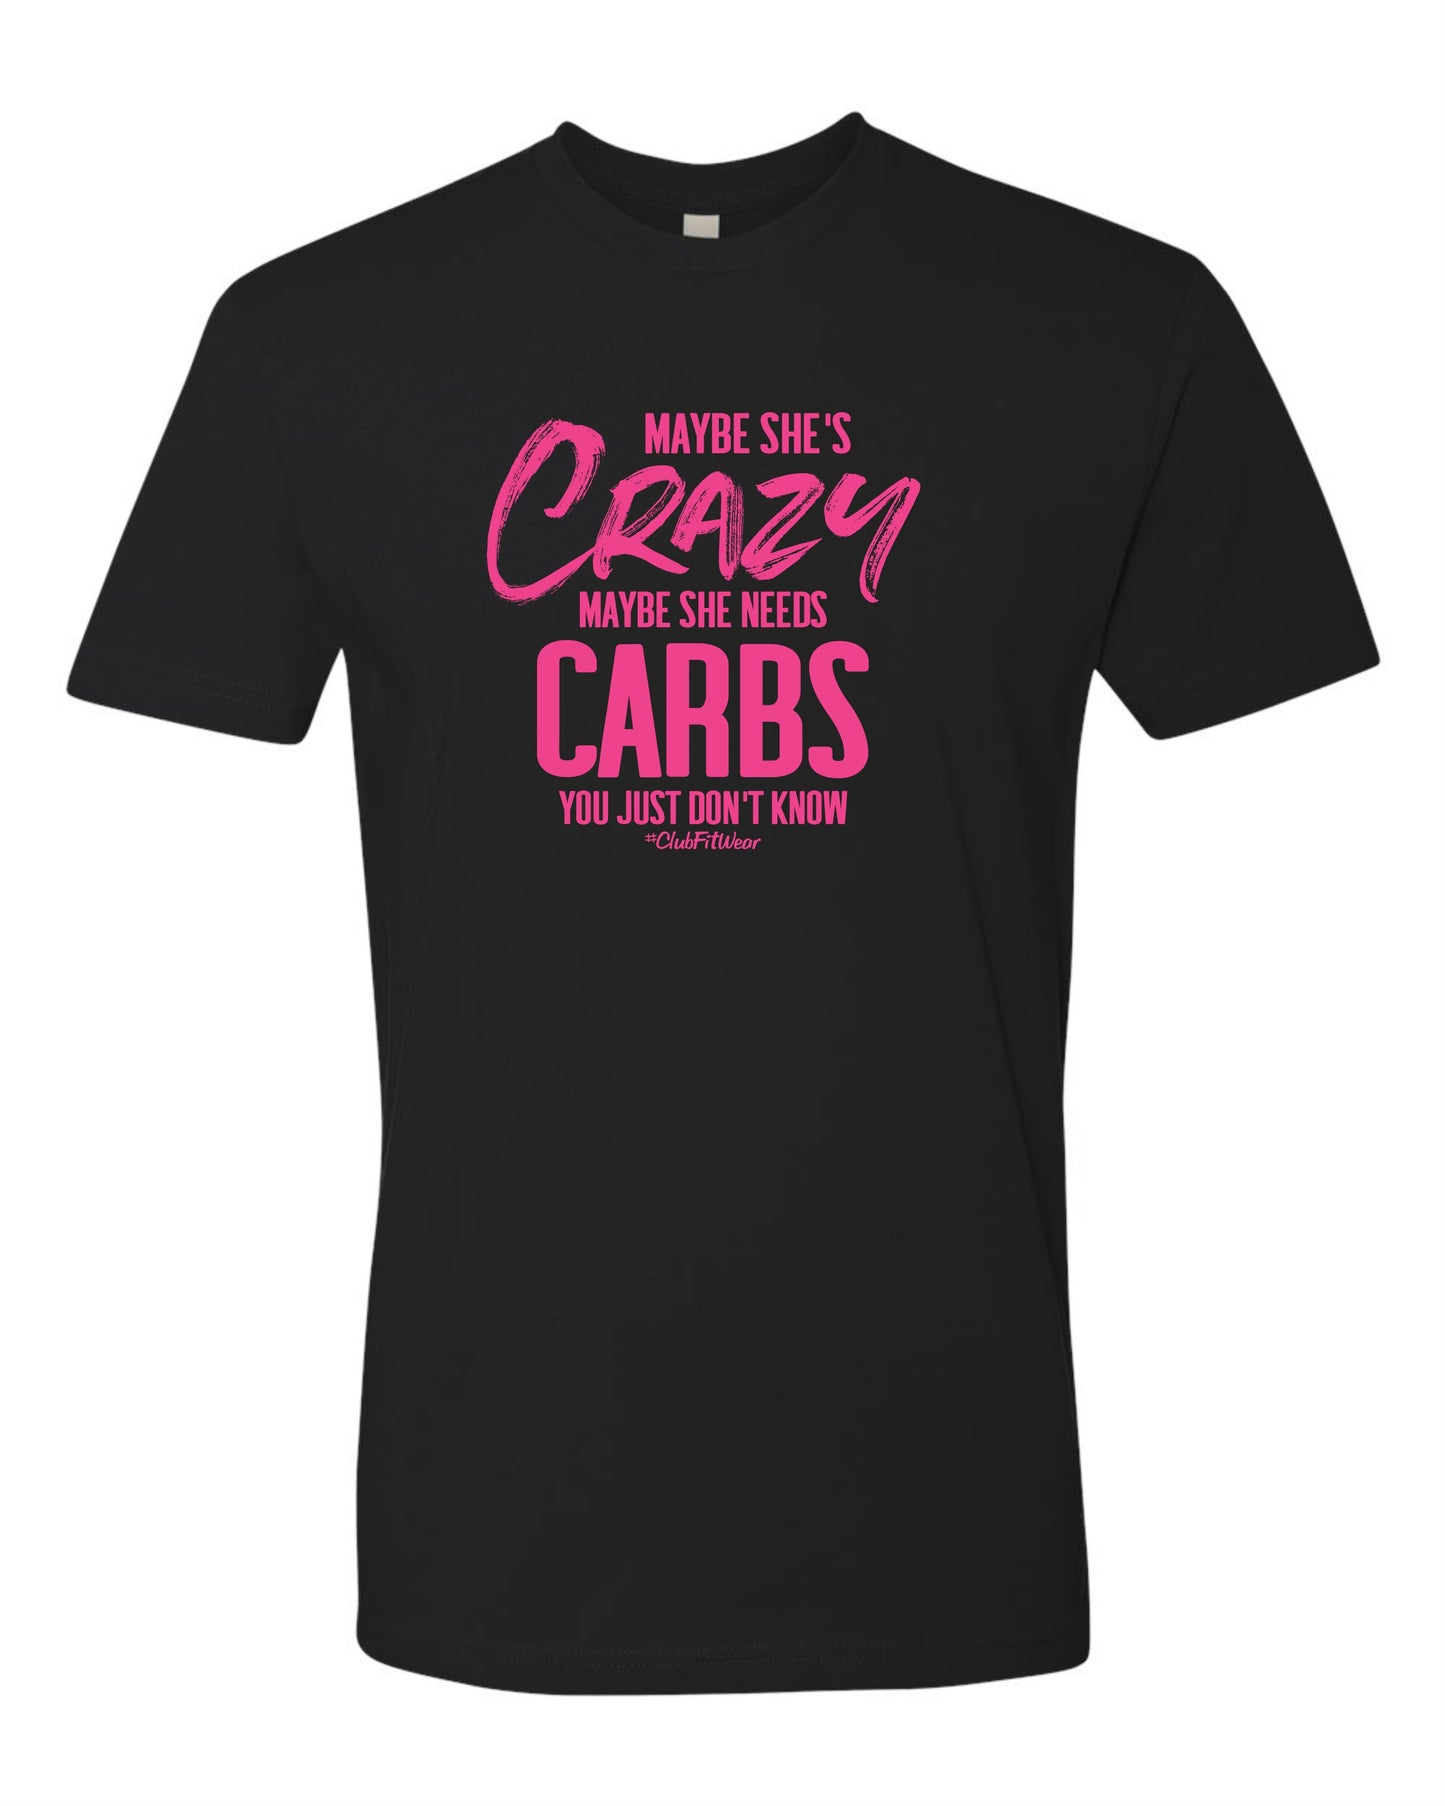 Maybe She's Crazy Maybe She Needs Carbs